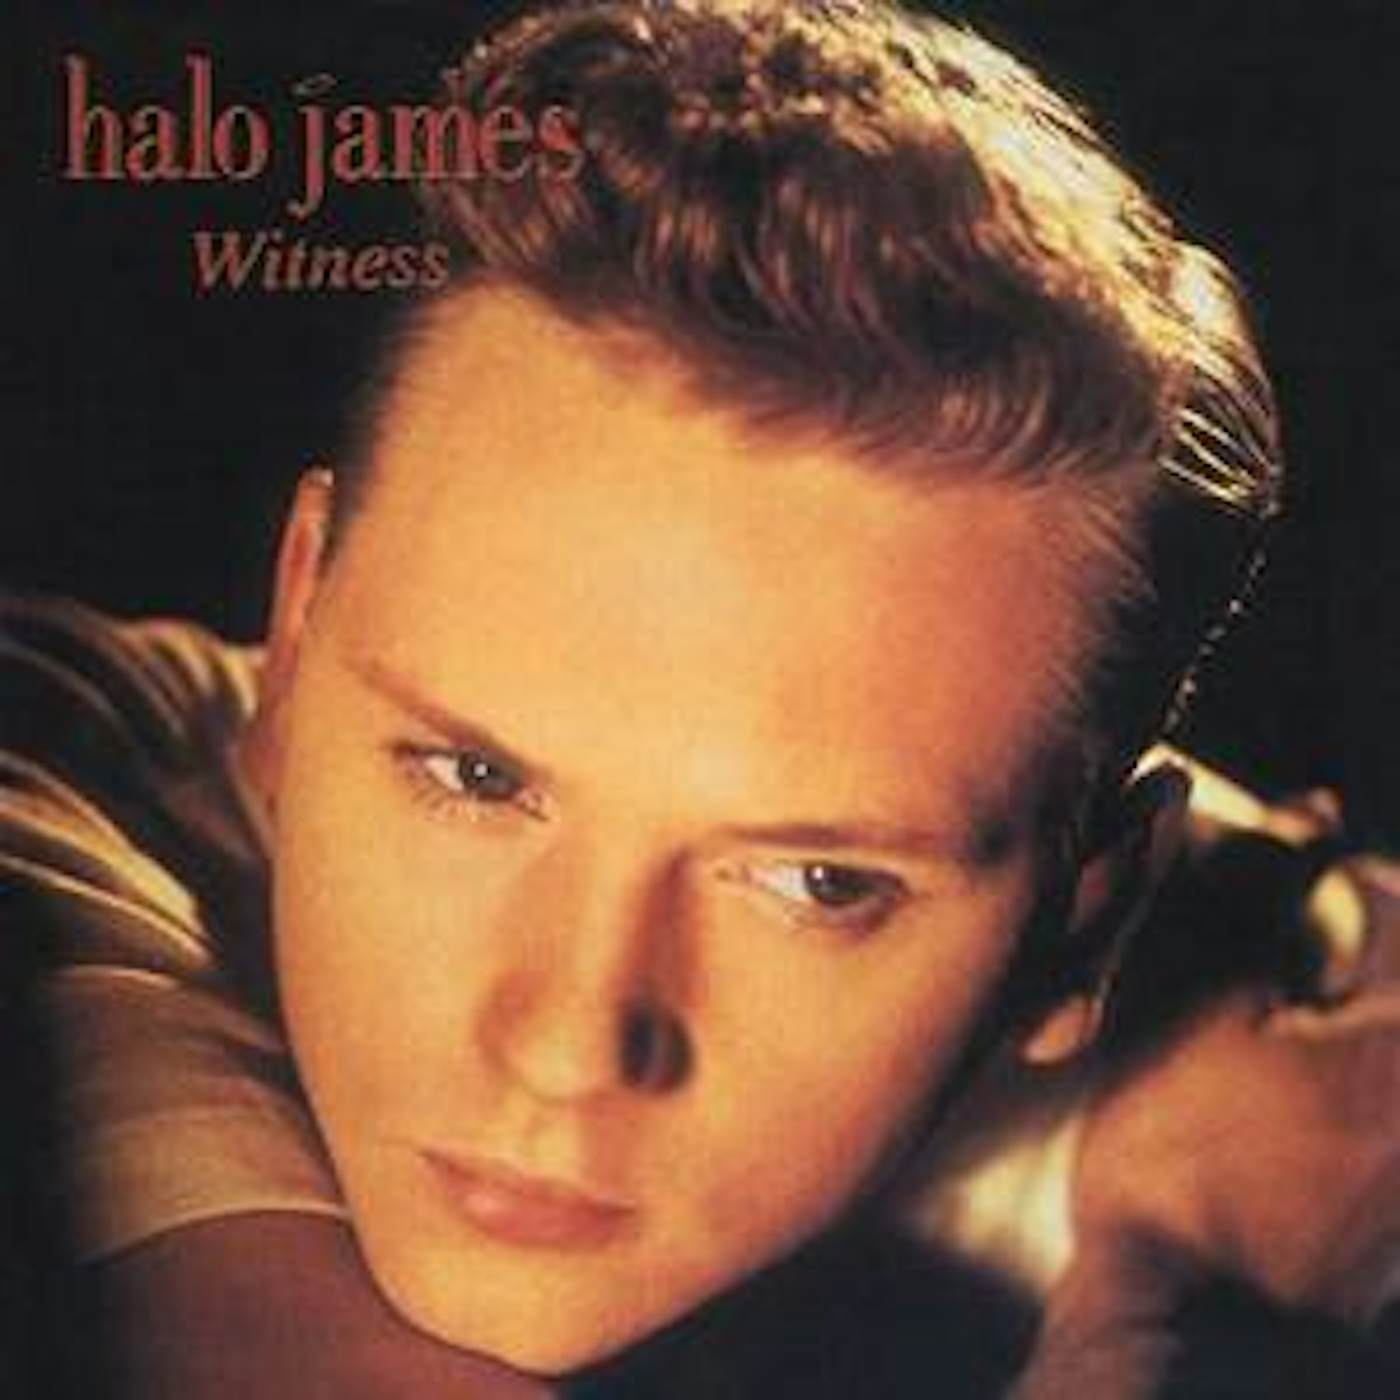 Halo James WITNESS: SPECIAL EDITION CD